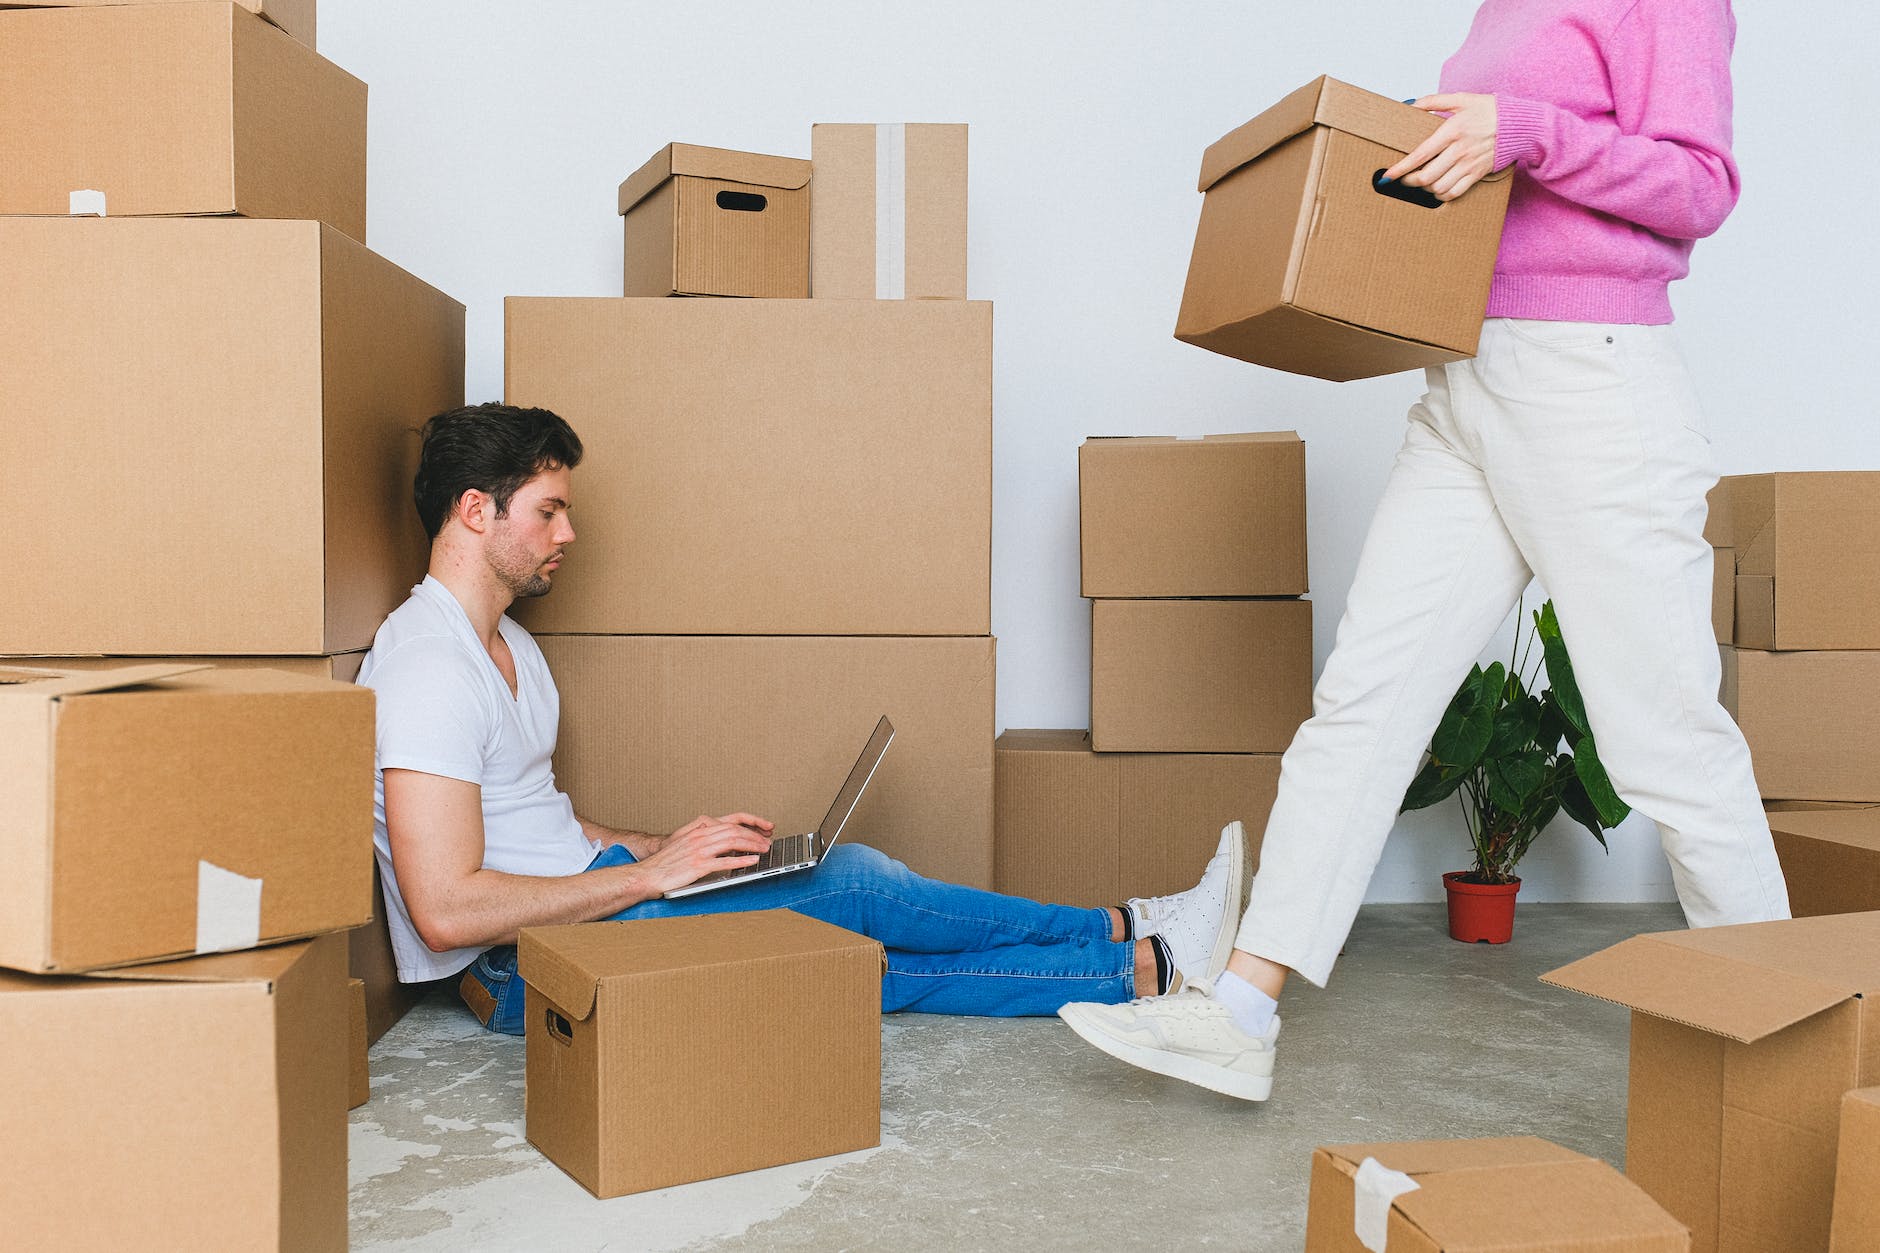 crop woman arranging carton boxes during relocation with boyfriend using laptop on floor